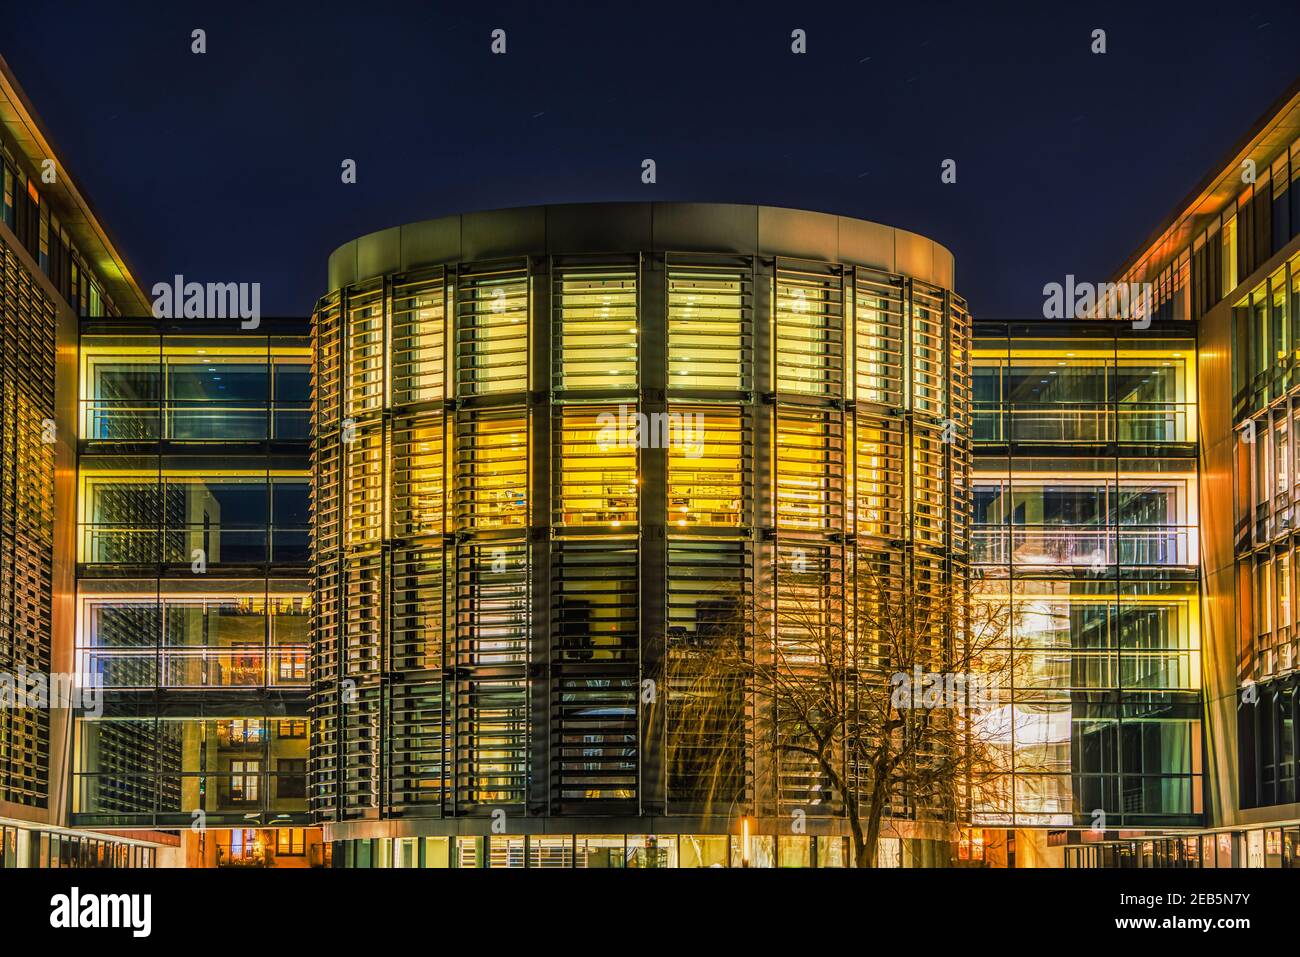 Modern opulent cylindrical office or headquarter illuminated at night with sun blinds and side passageways features a contemporary massive facade Stock Photo